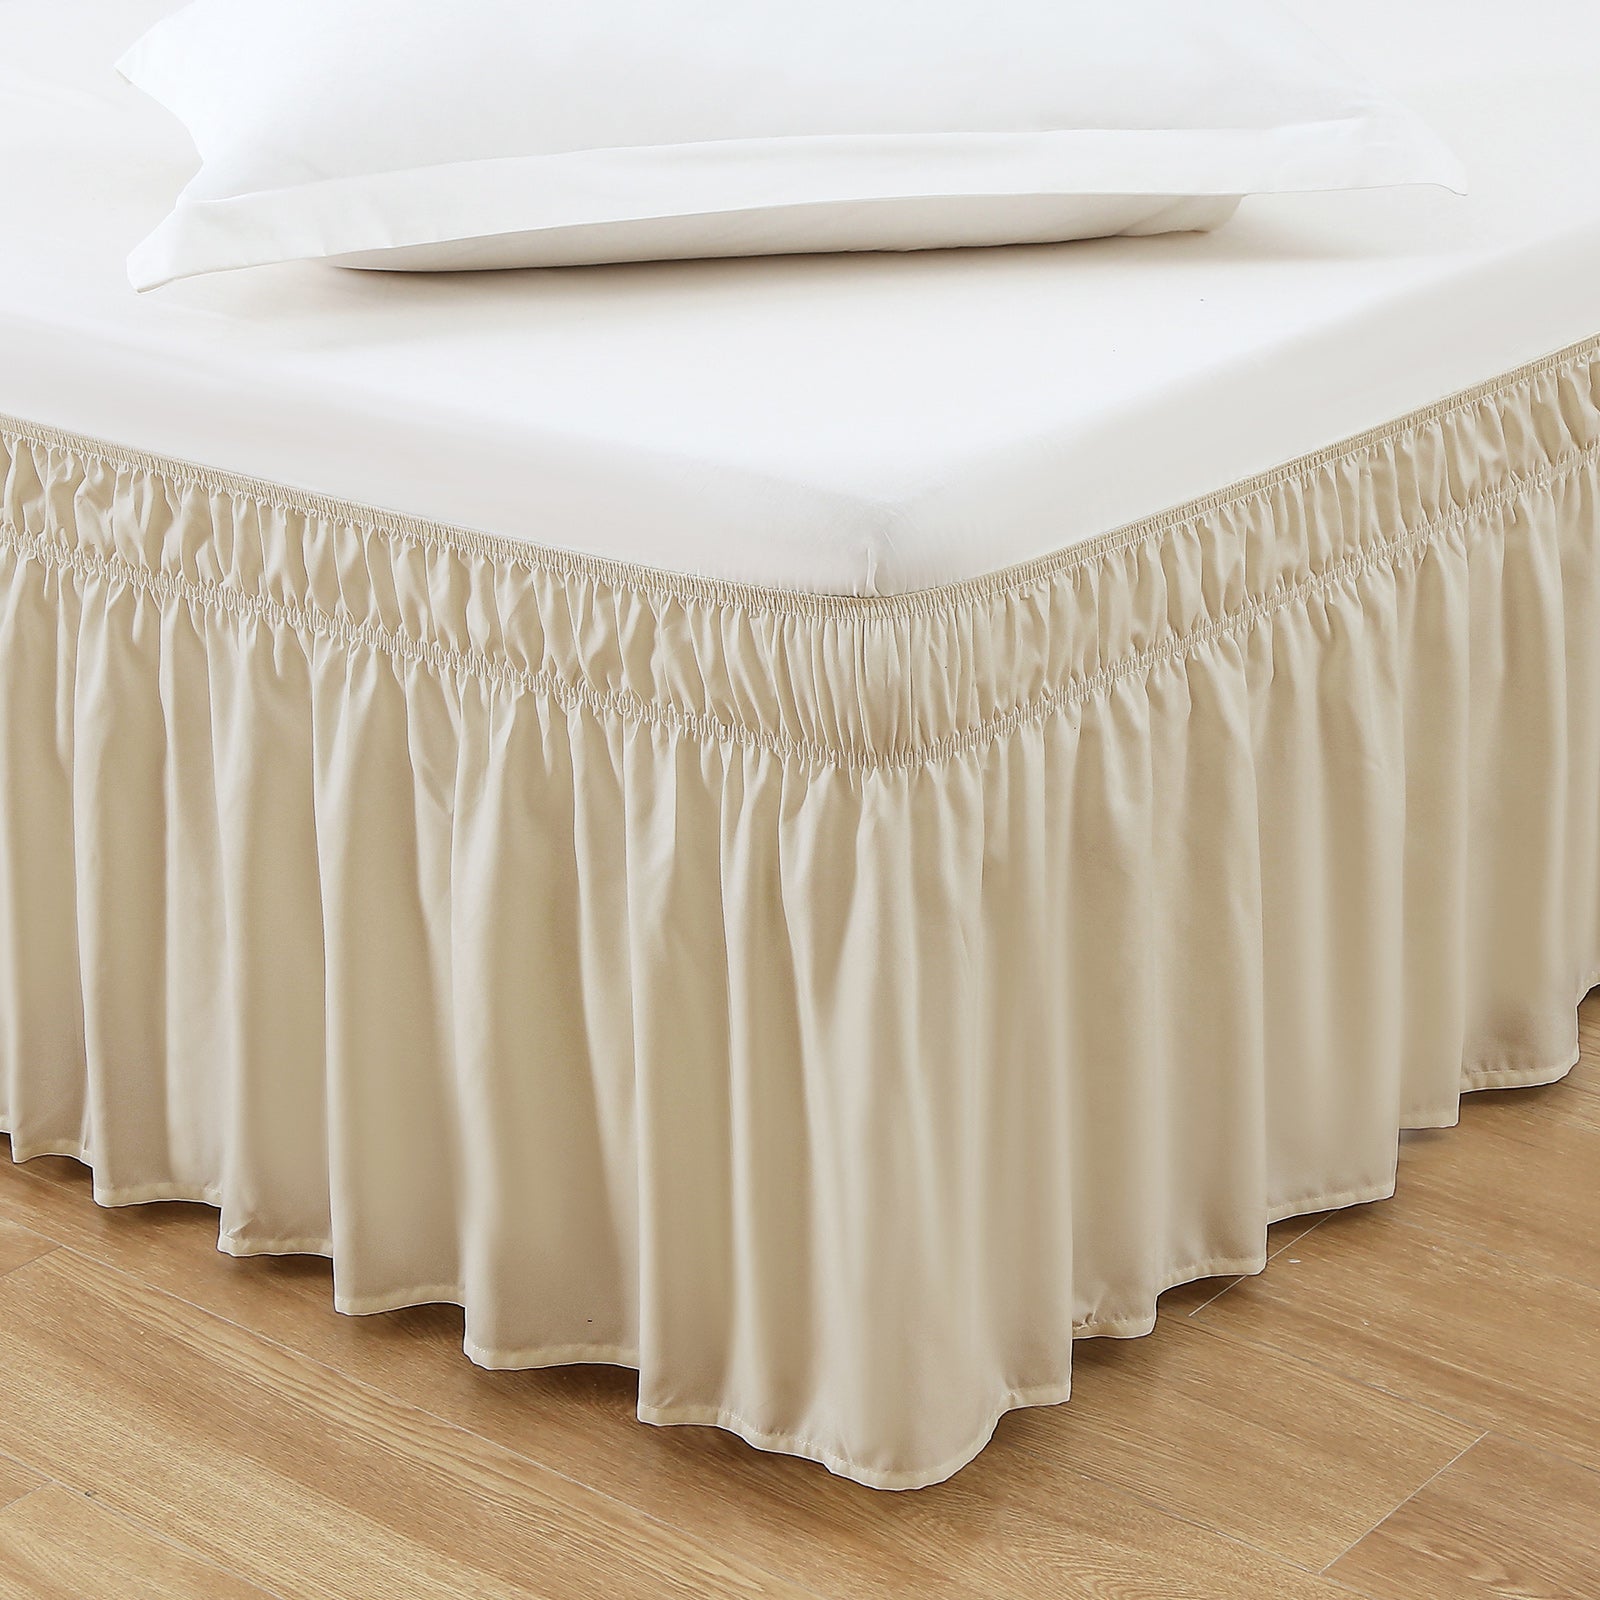 MEILA Wrap Around Bed Skirt Three Fabric Sides Elastic Dust Ruffled 16 Inch Tailored Drop,Easy to Install Fade Resistant-White, Queen/King